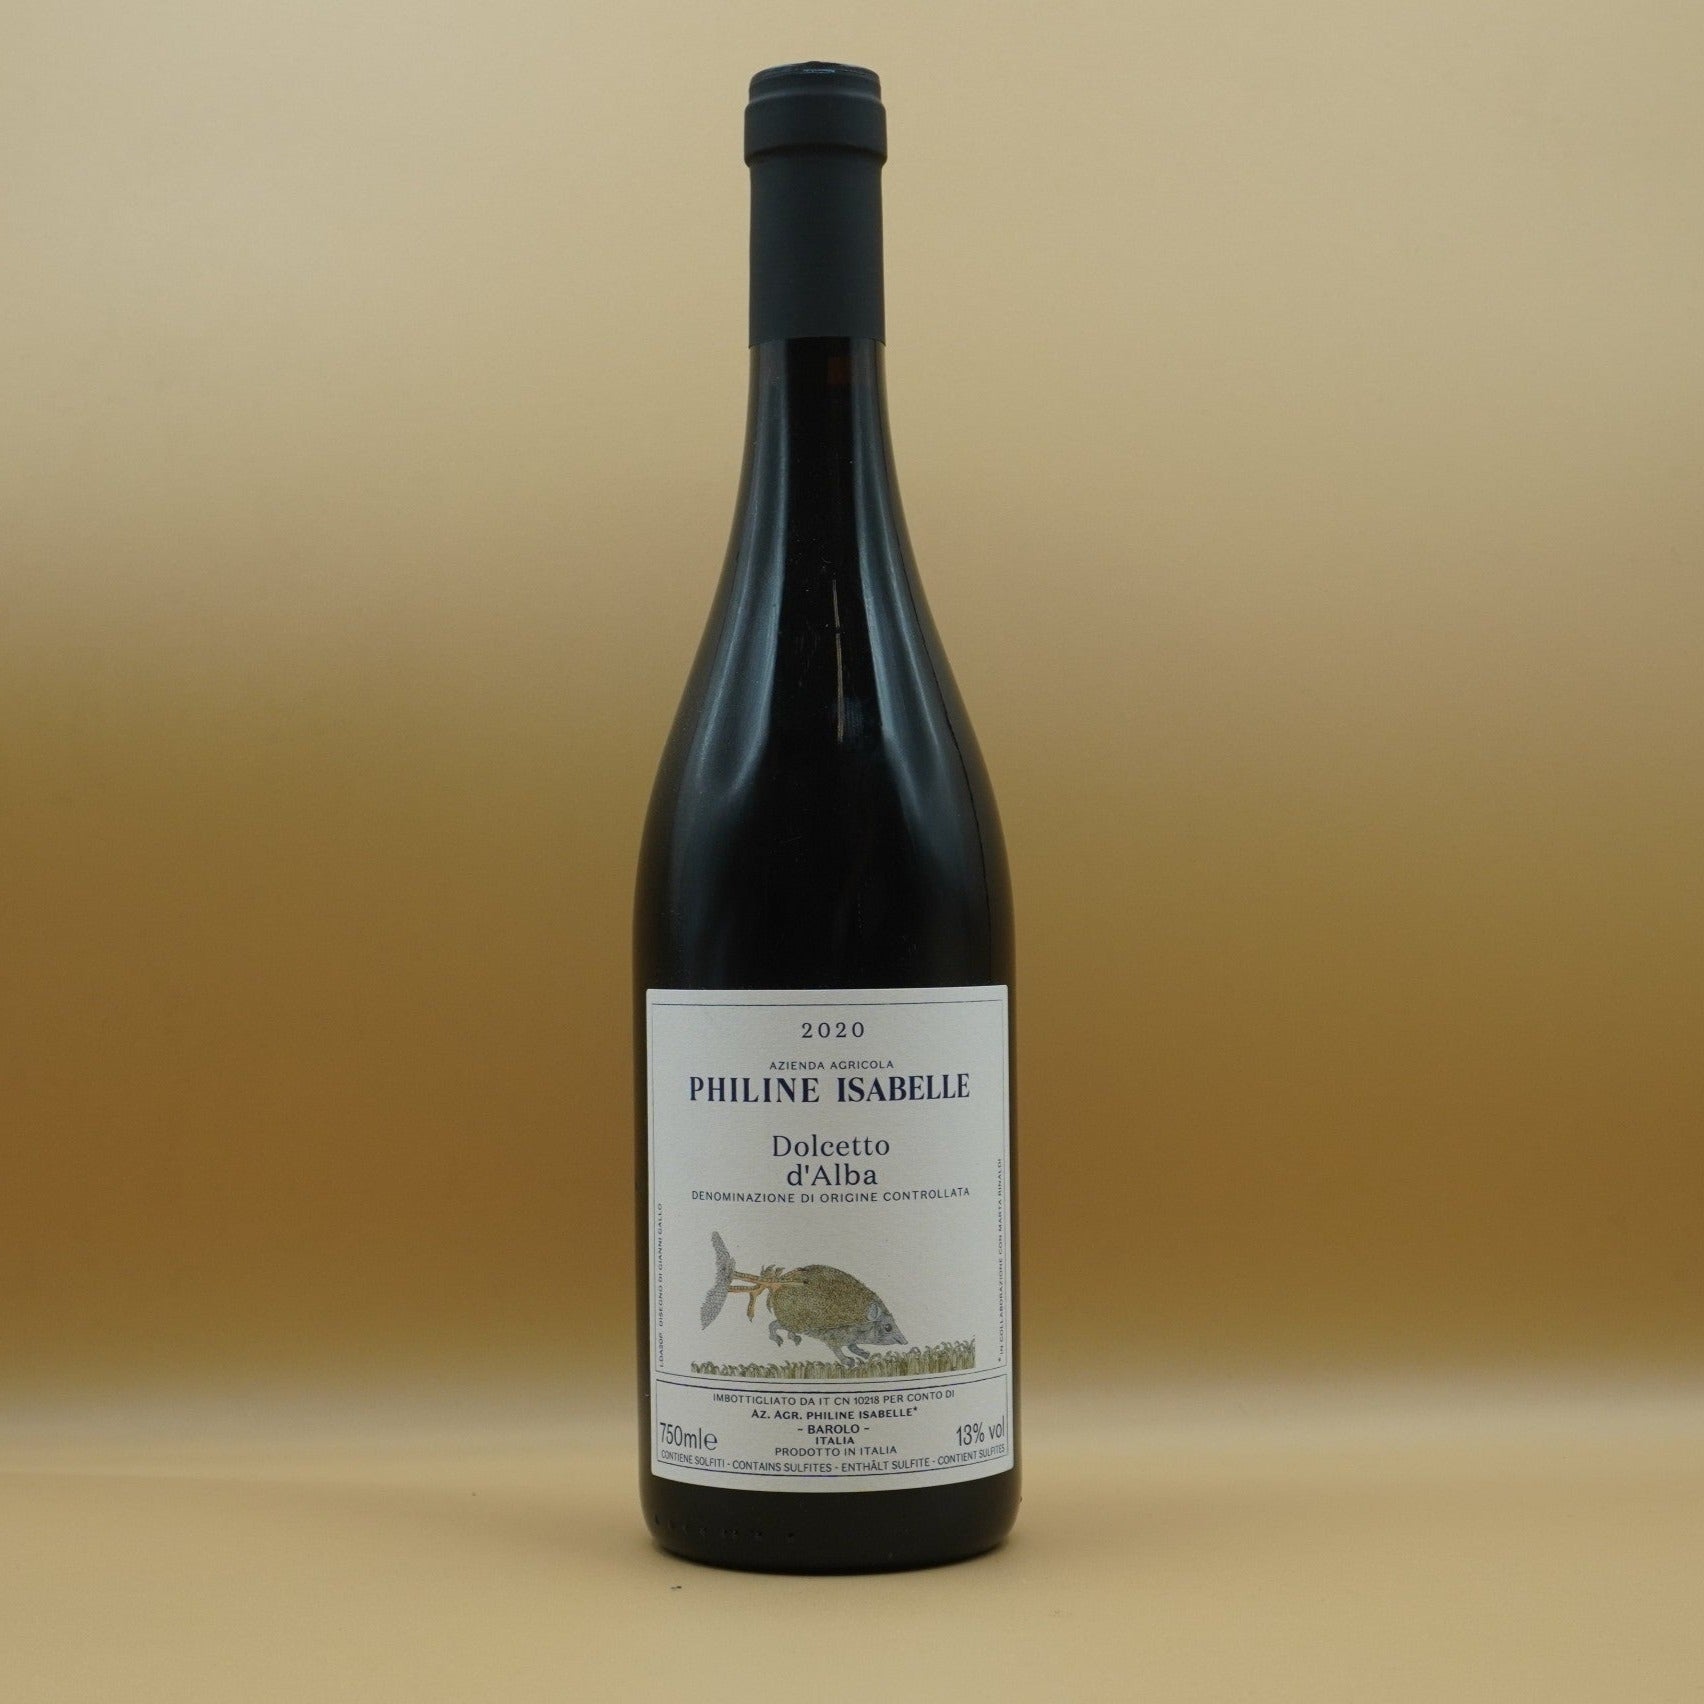 Philine Isabelle, Dolcetto d'Alba 2020